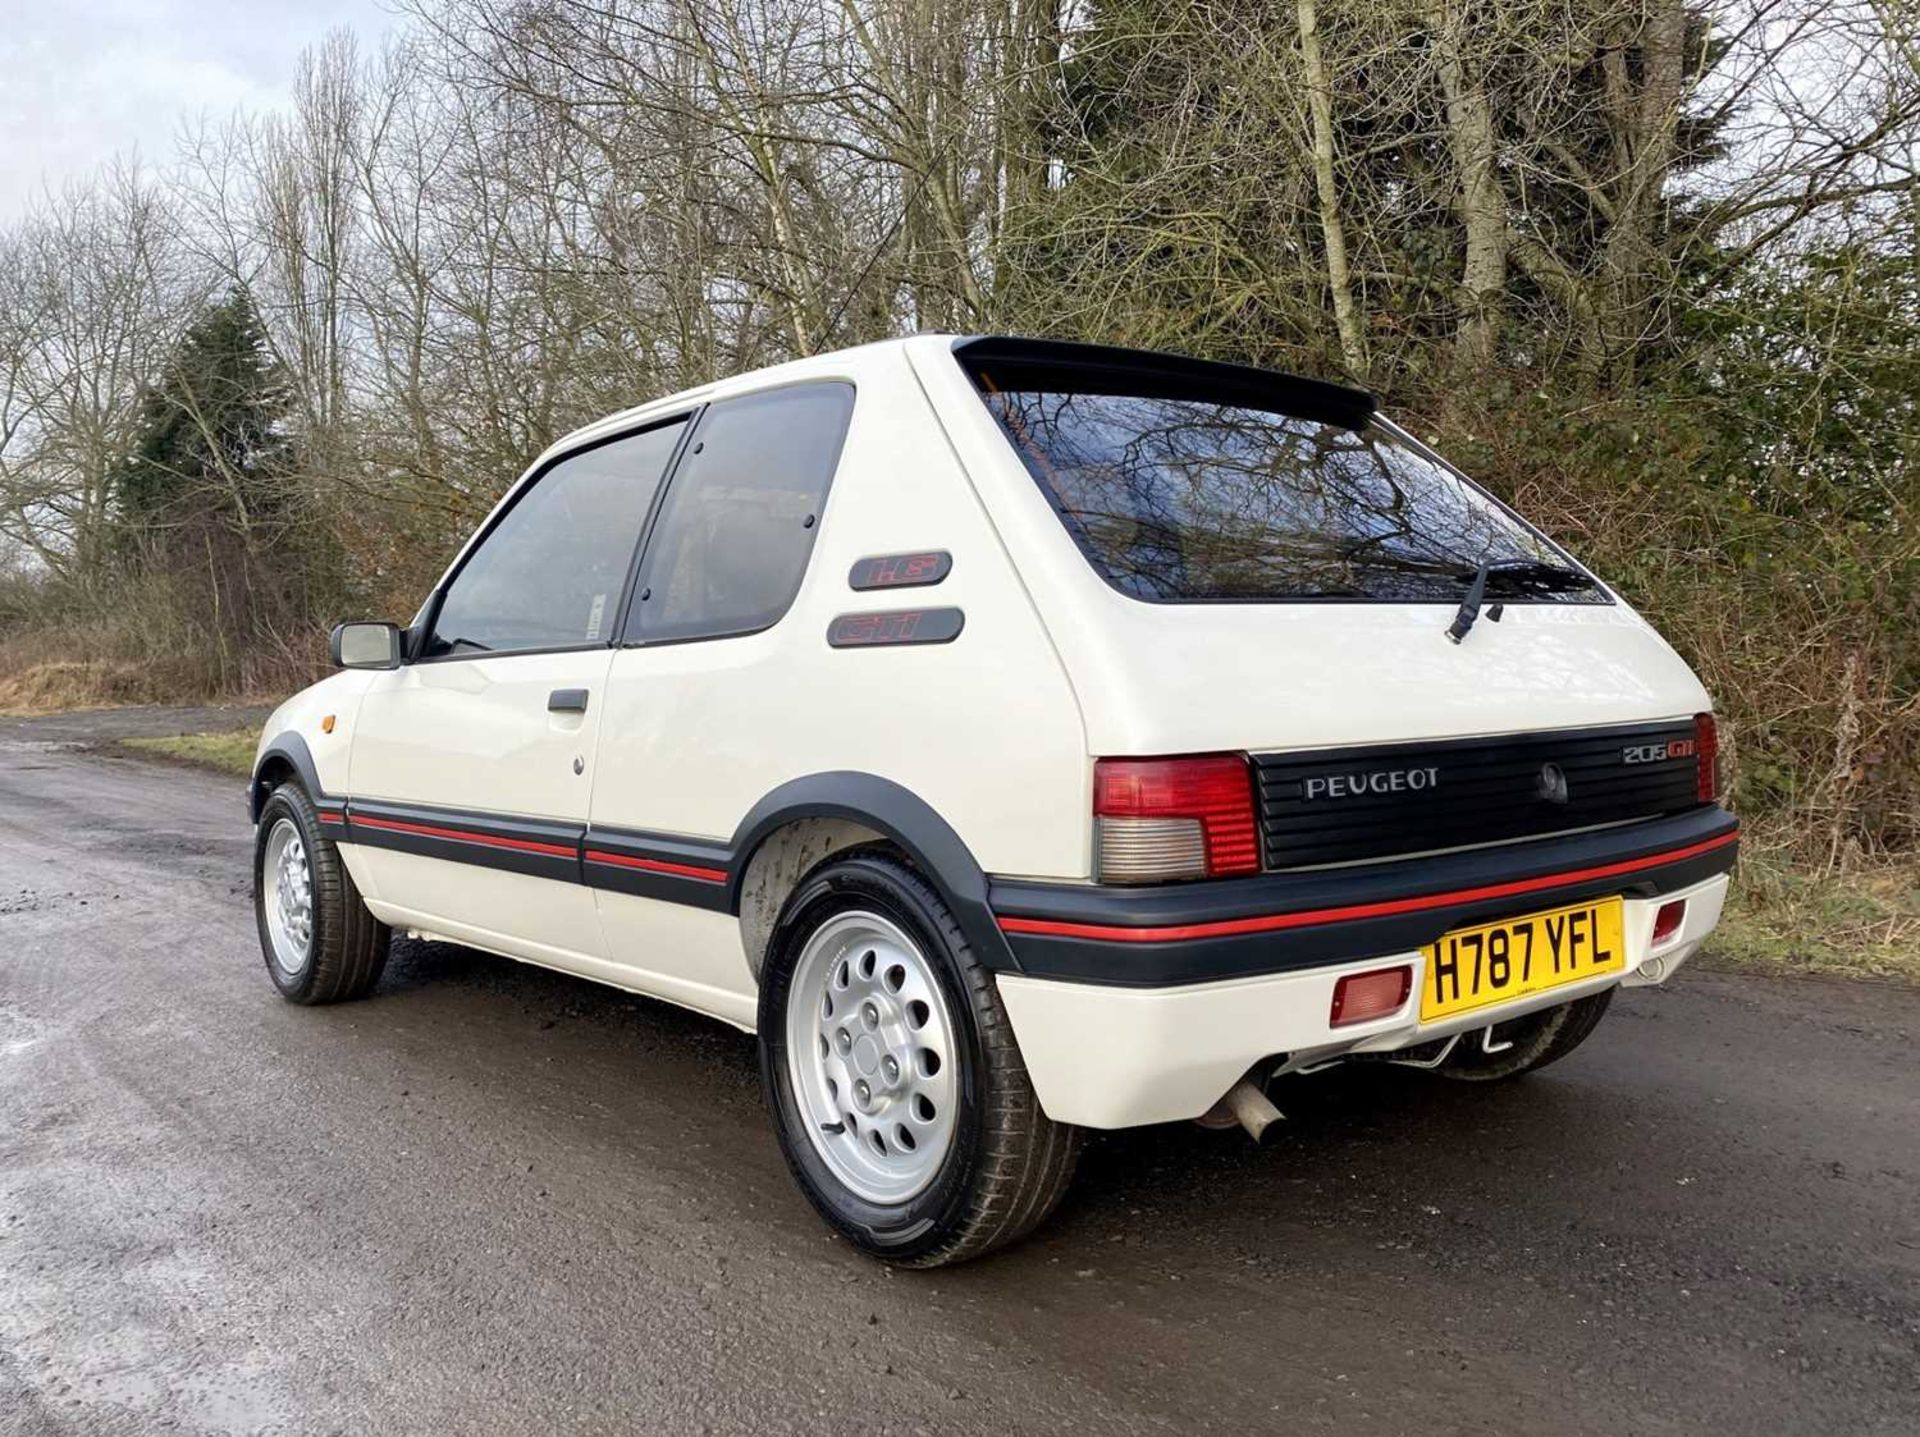 1990 Peugeot 205 GTi 1.6 Only 56,000 miles, same owner for 16 years - Image 20 of 81